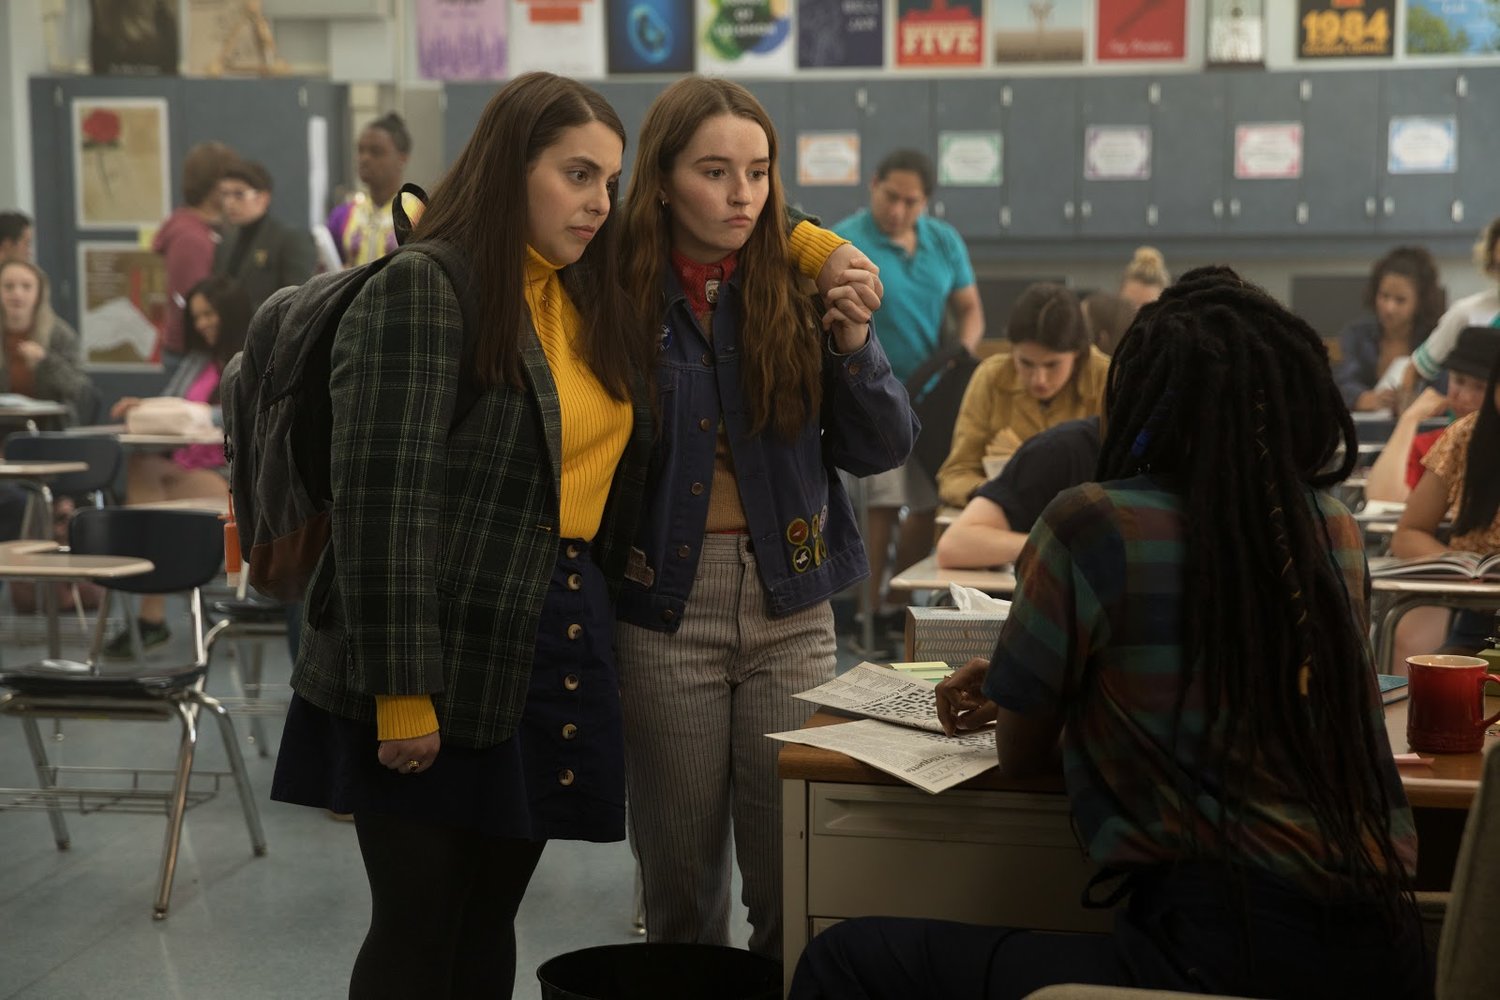 Molly (Beanie Feldstein) is known for being studious, not her fun-loving personality that we see throughout the film. She wears turtlenecks and a blazer to stand out and channel Ruth Bader Ginsburg. Her personal style is meant to feel out of place in California, mirroring her character being out of place in school. Photo Credit: Annapurna Pictures